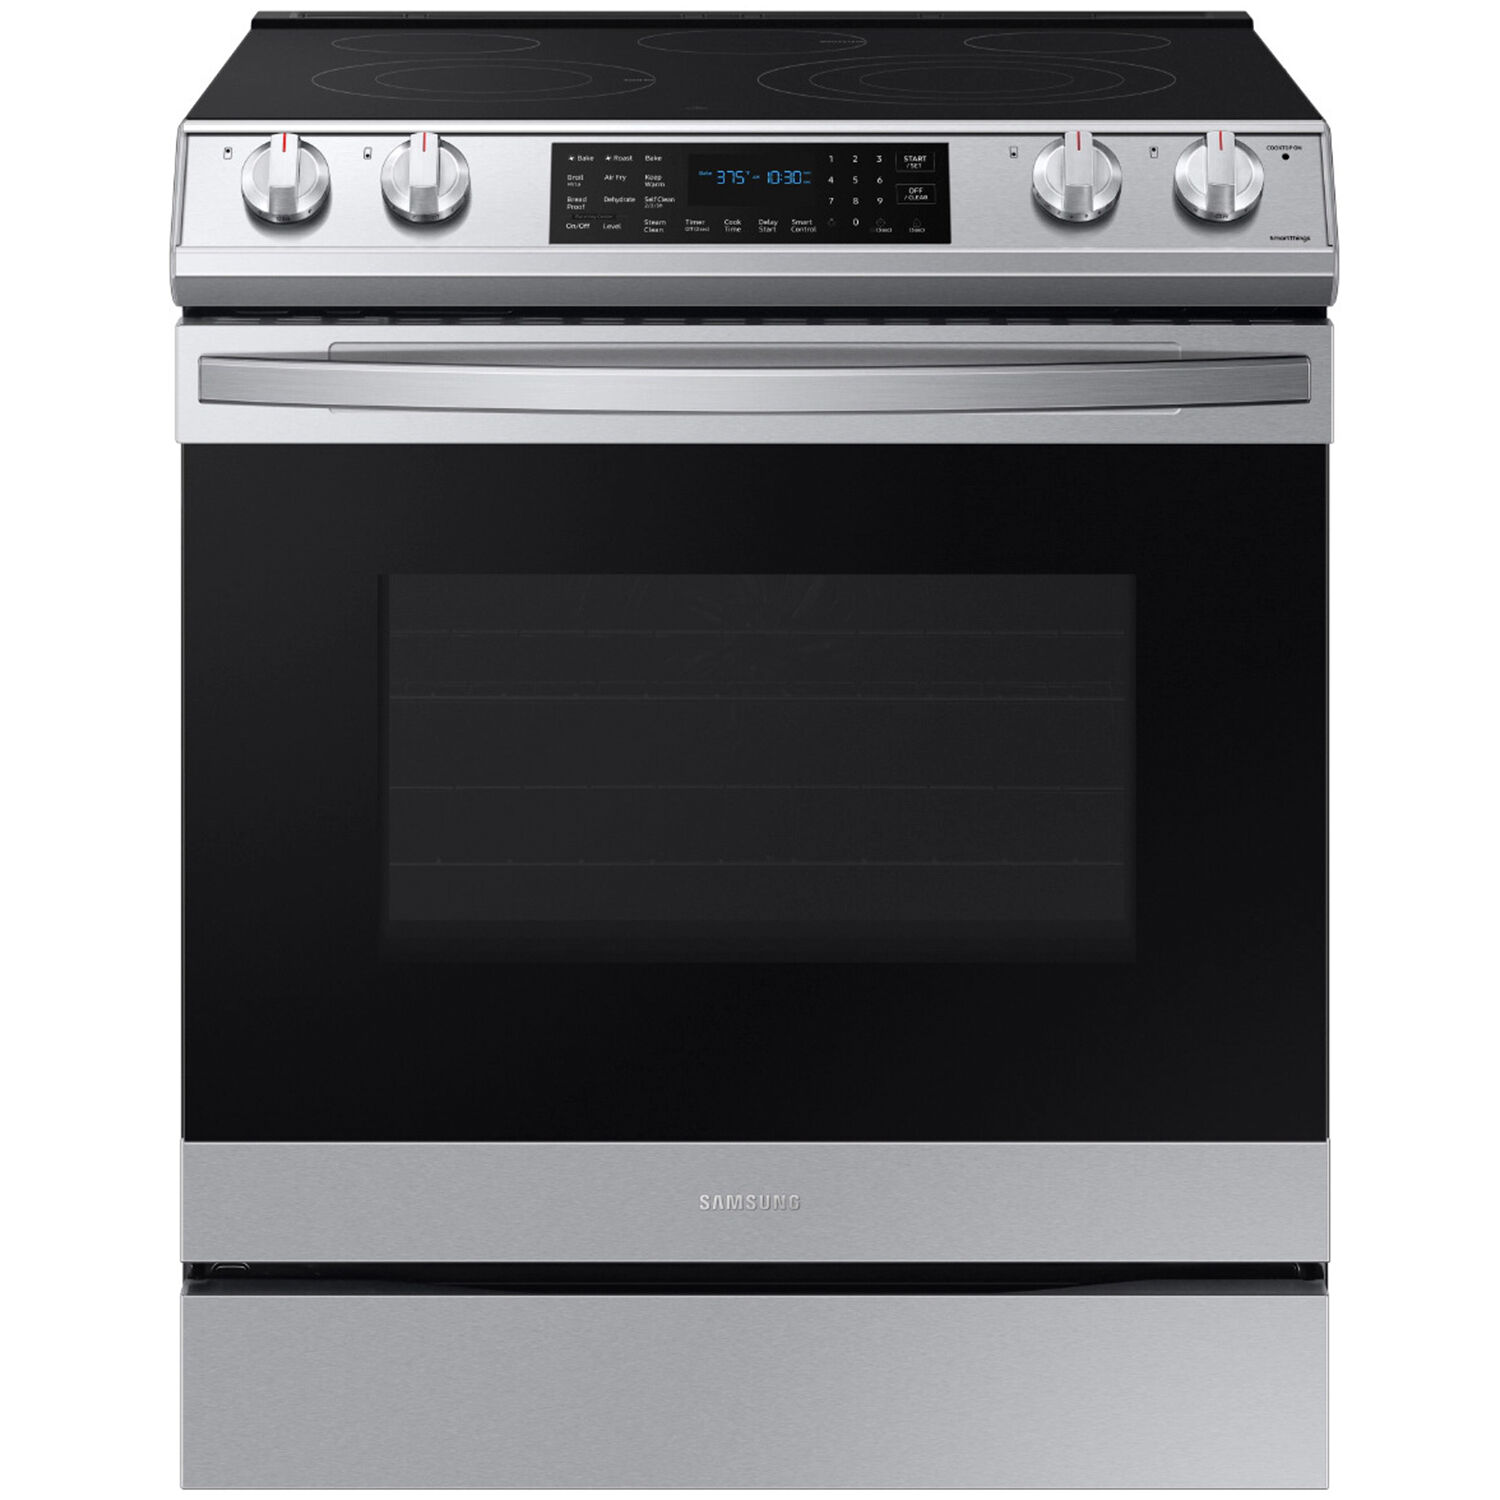 Details about   Stove Metal Knobs Replacements Oven Gas Range Part Fits Various Samsung Models 